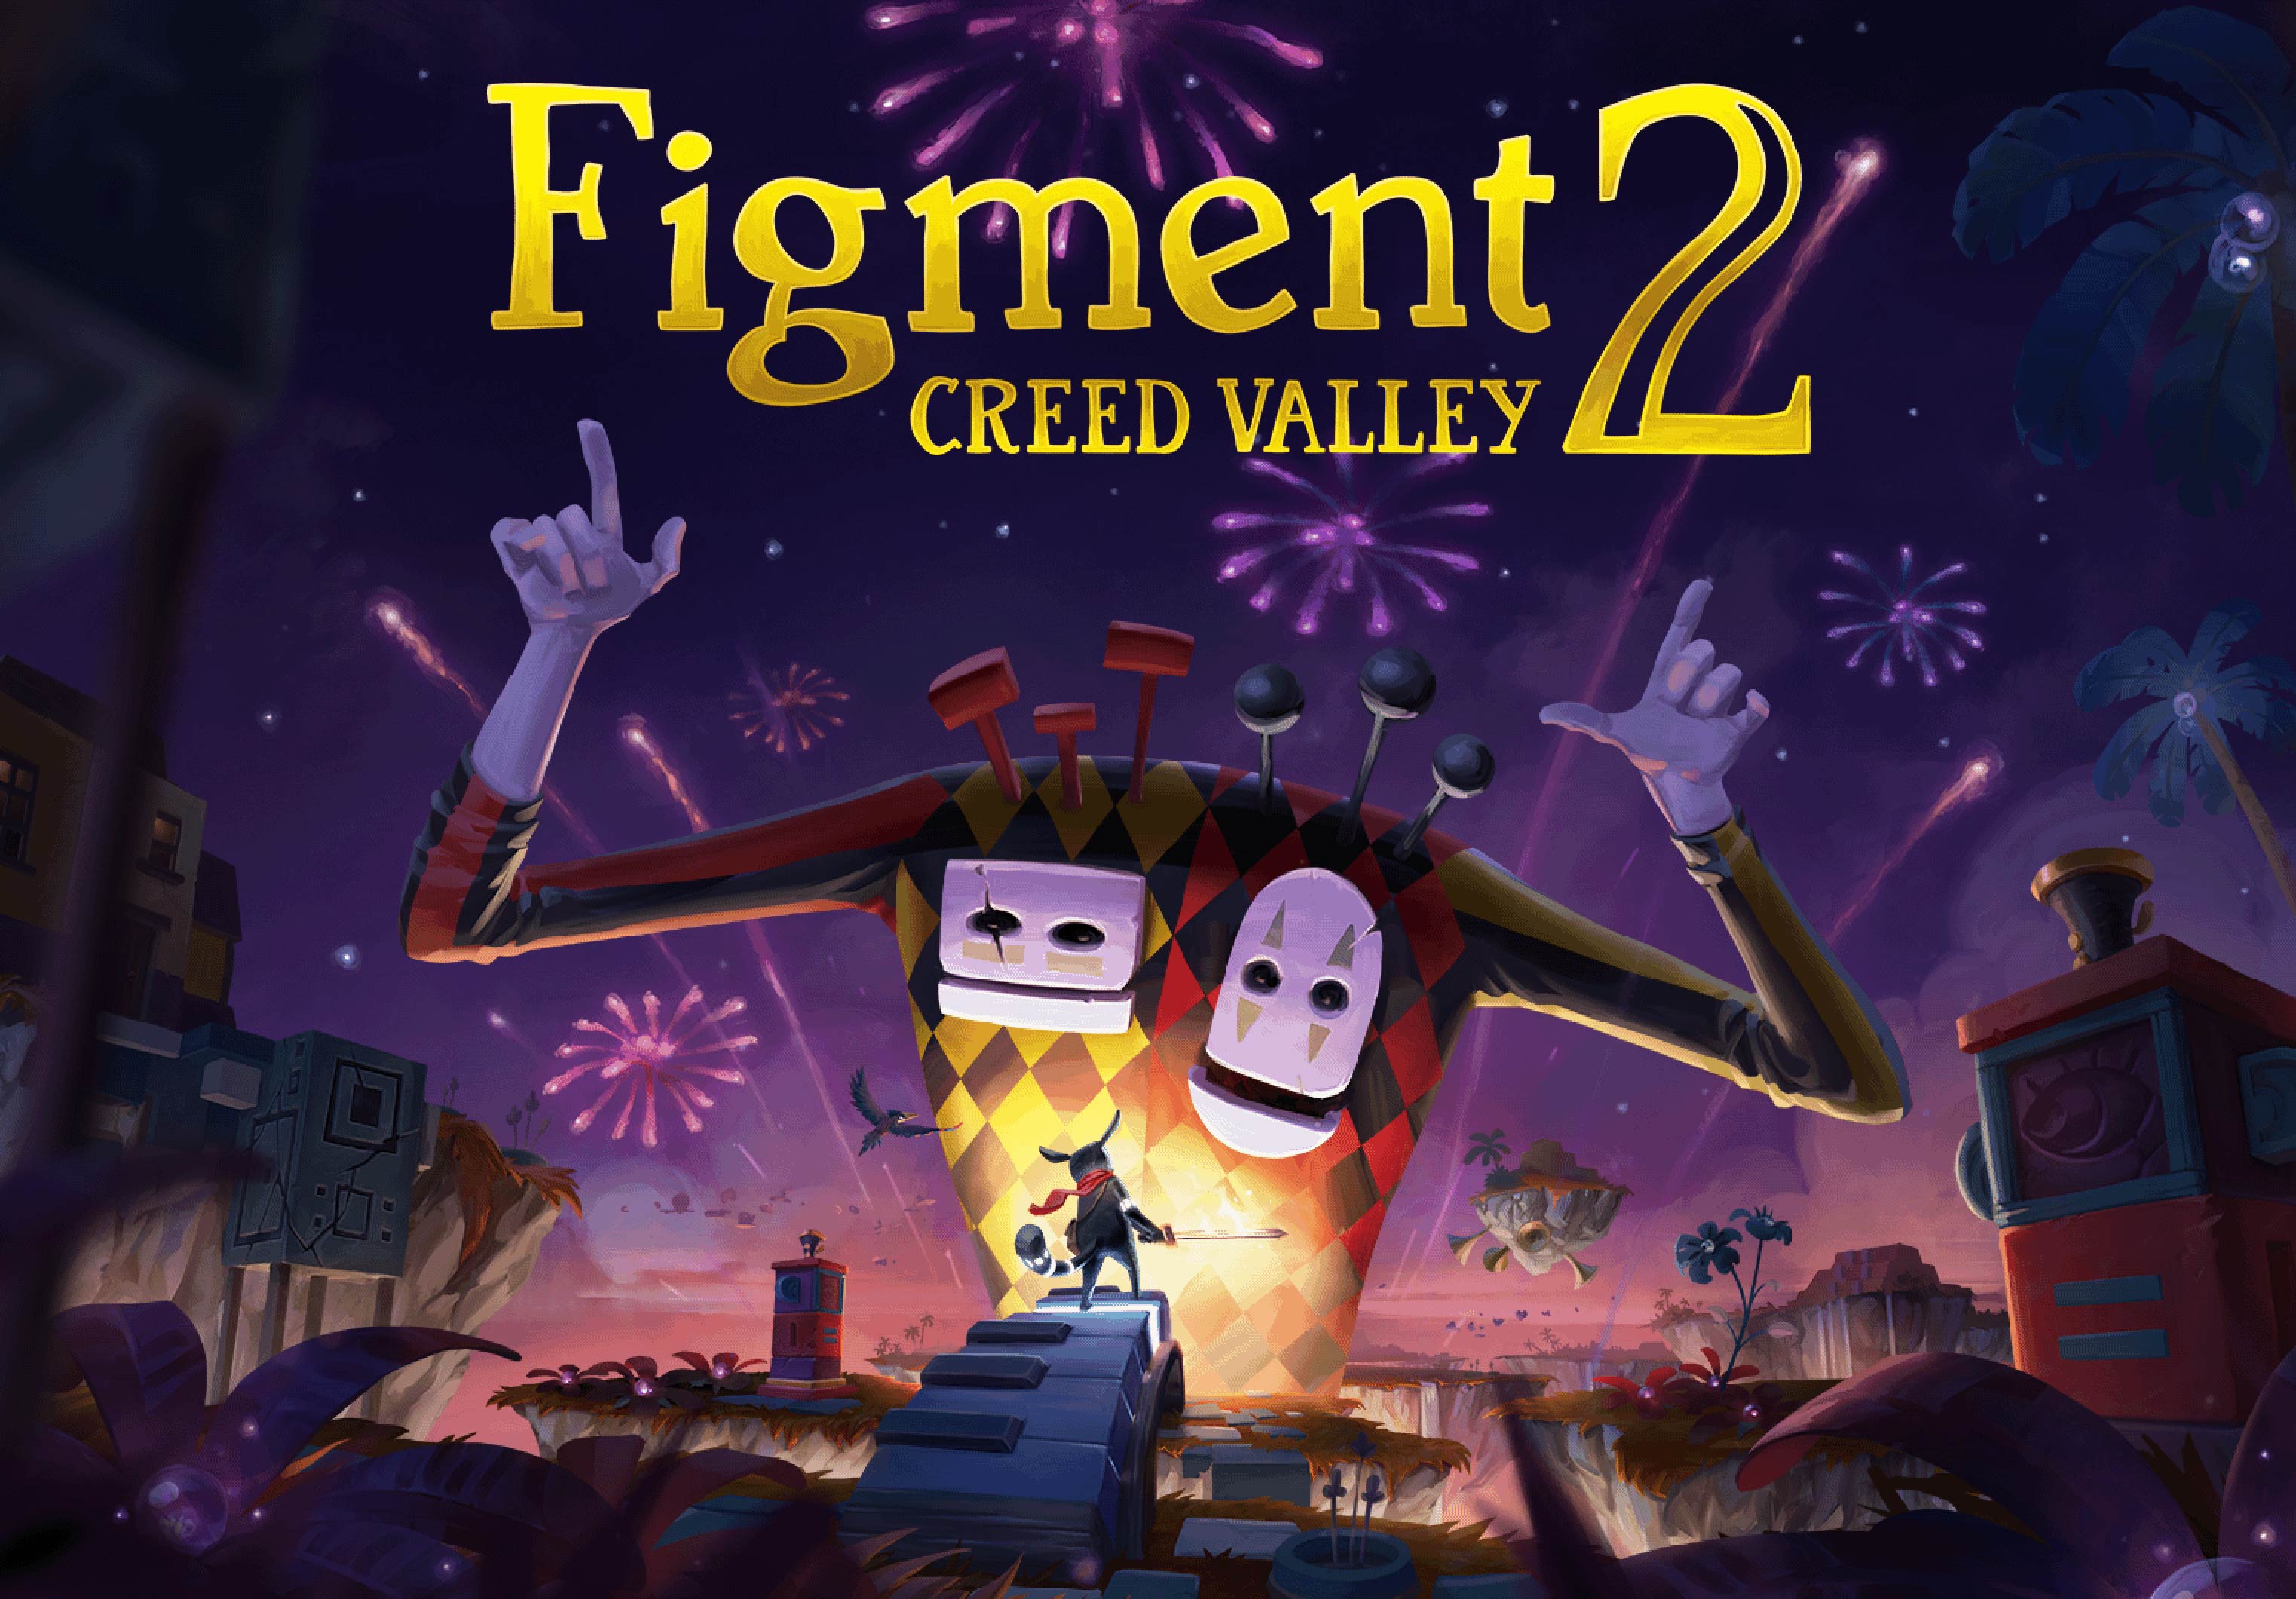 Save the Mind from Nightmares with Figment 2: Creed Valley